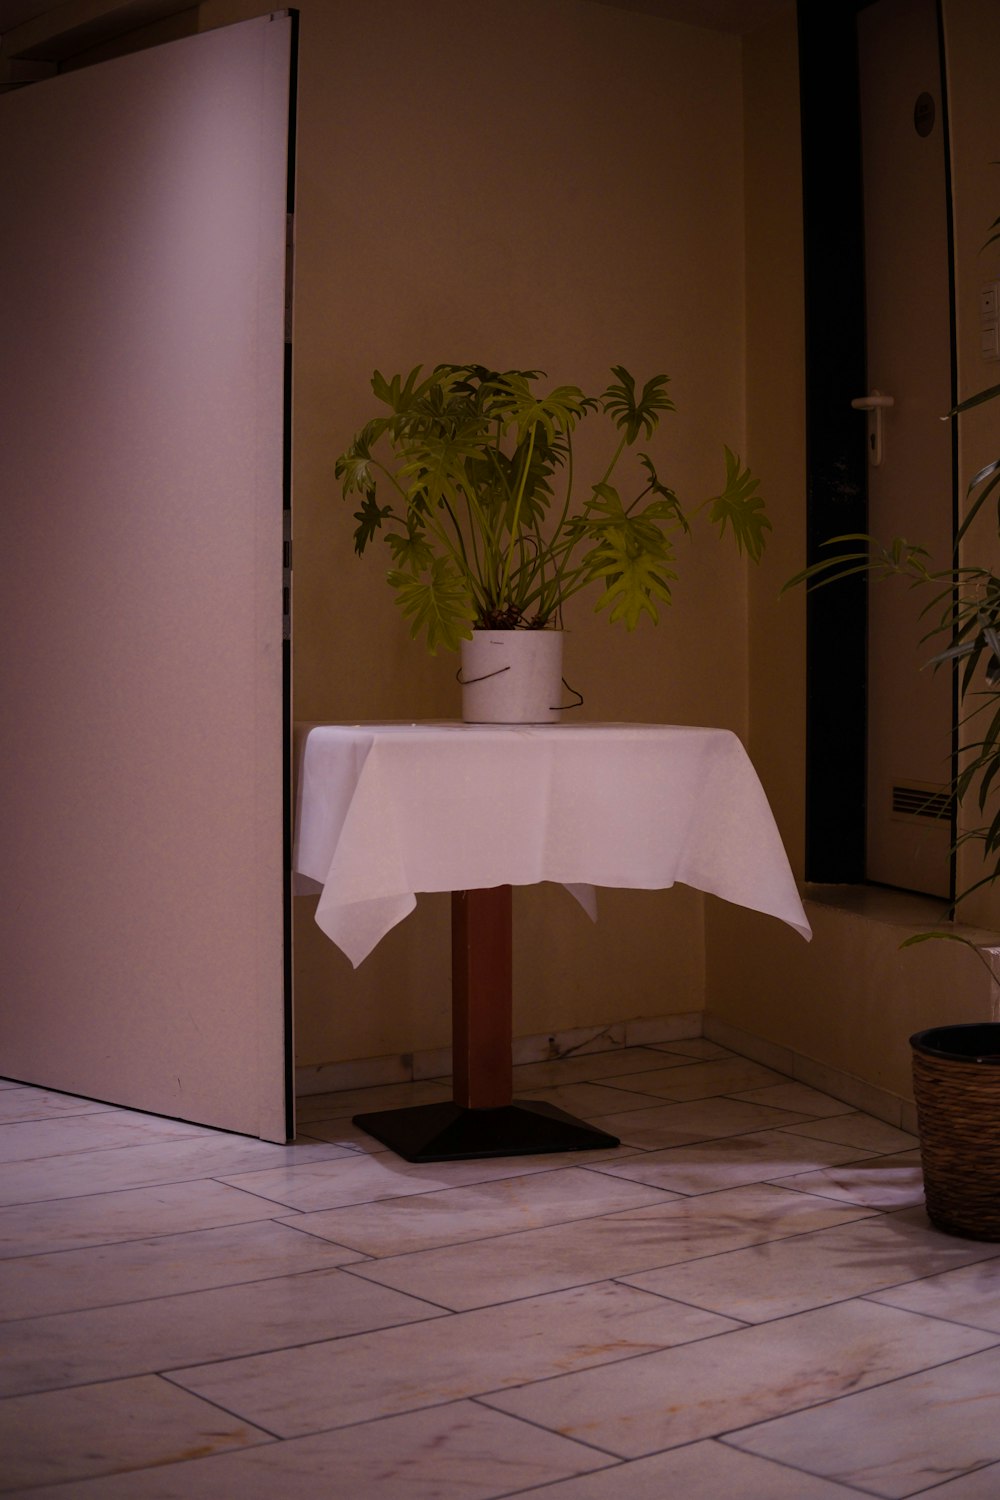 a table with a white table cloth and a potted plant